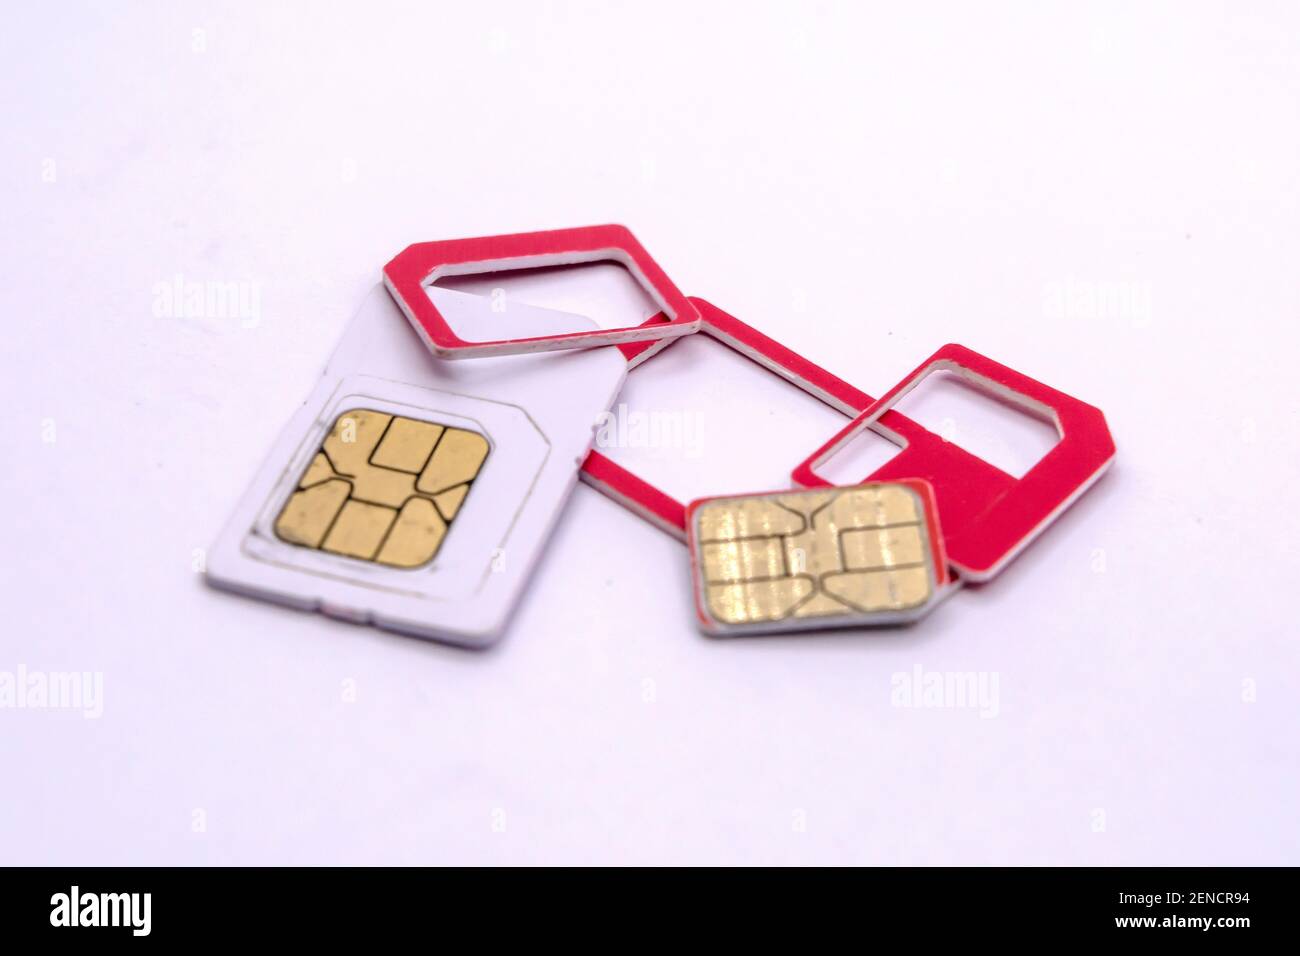 subscriber identification module or SIM card. SIM card in different sizes  isolated on white background. mini, micro, nano sim. gsm chip Stock Photo -  Alamy